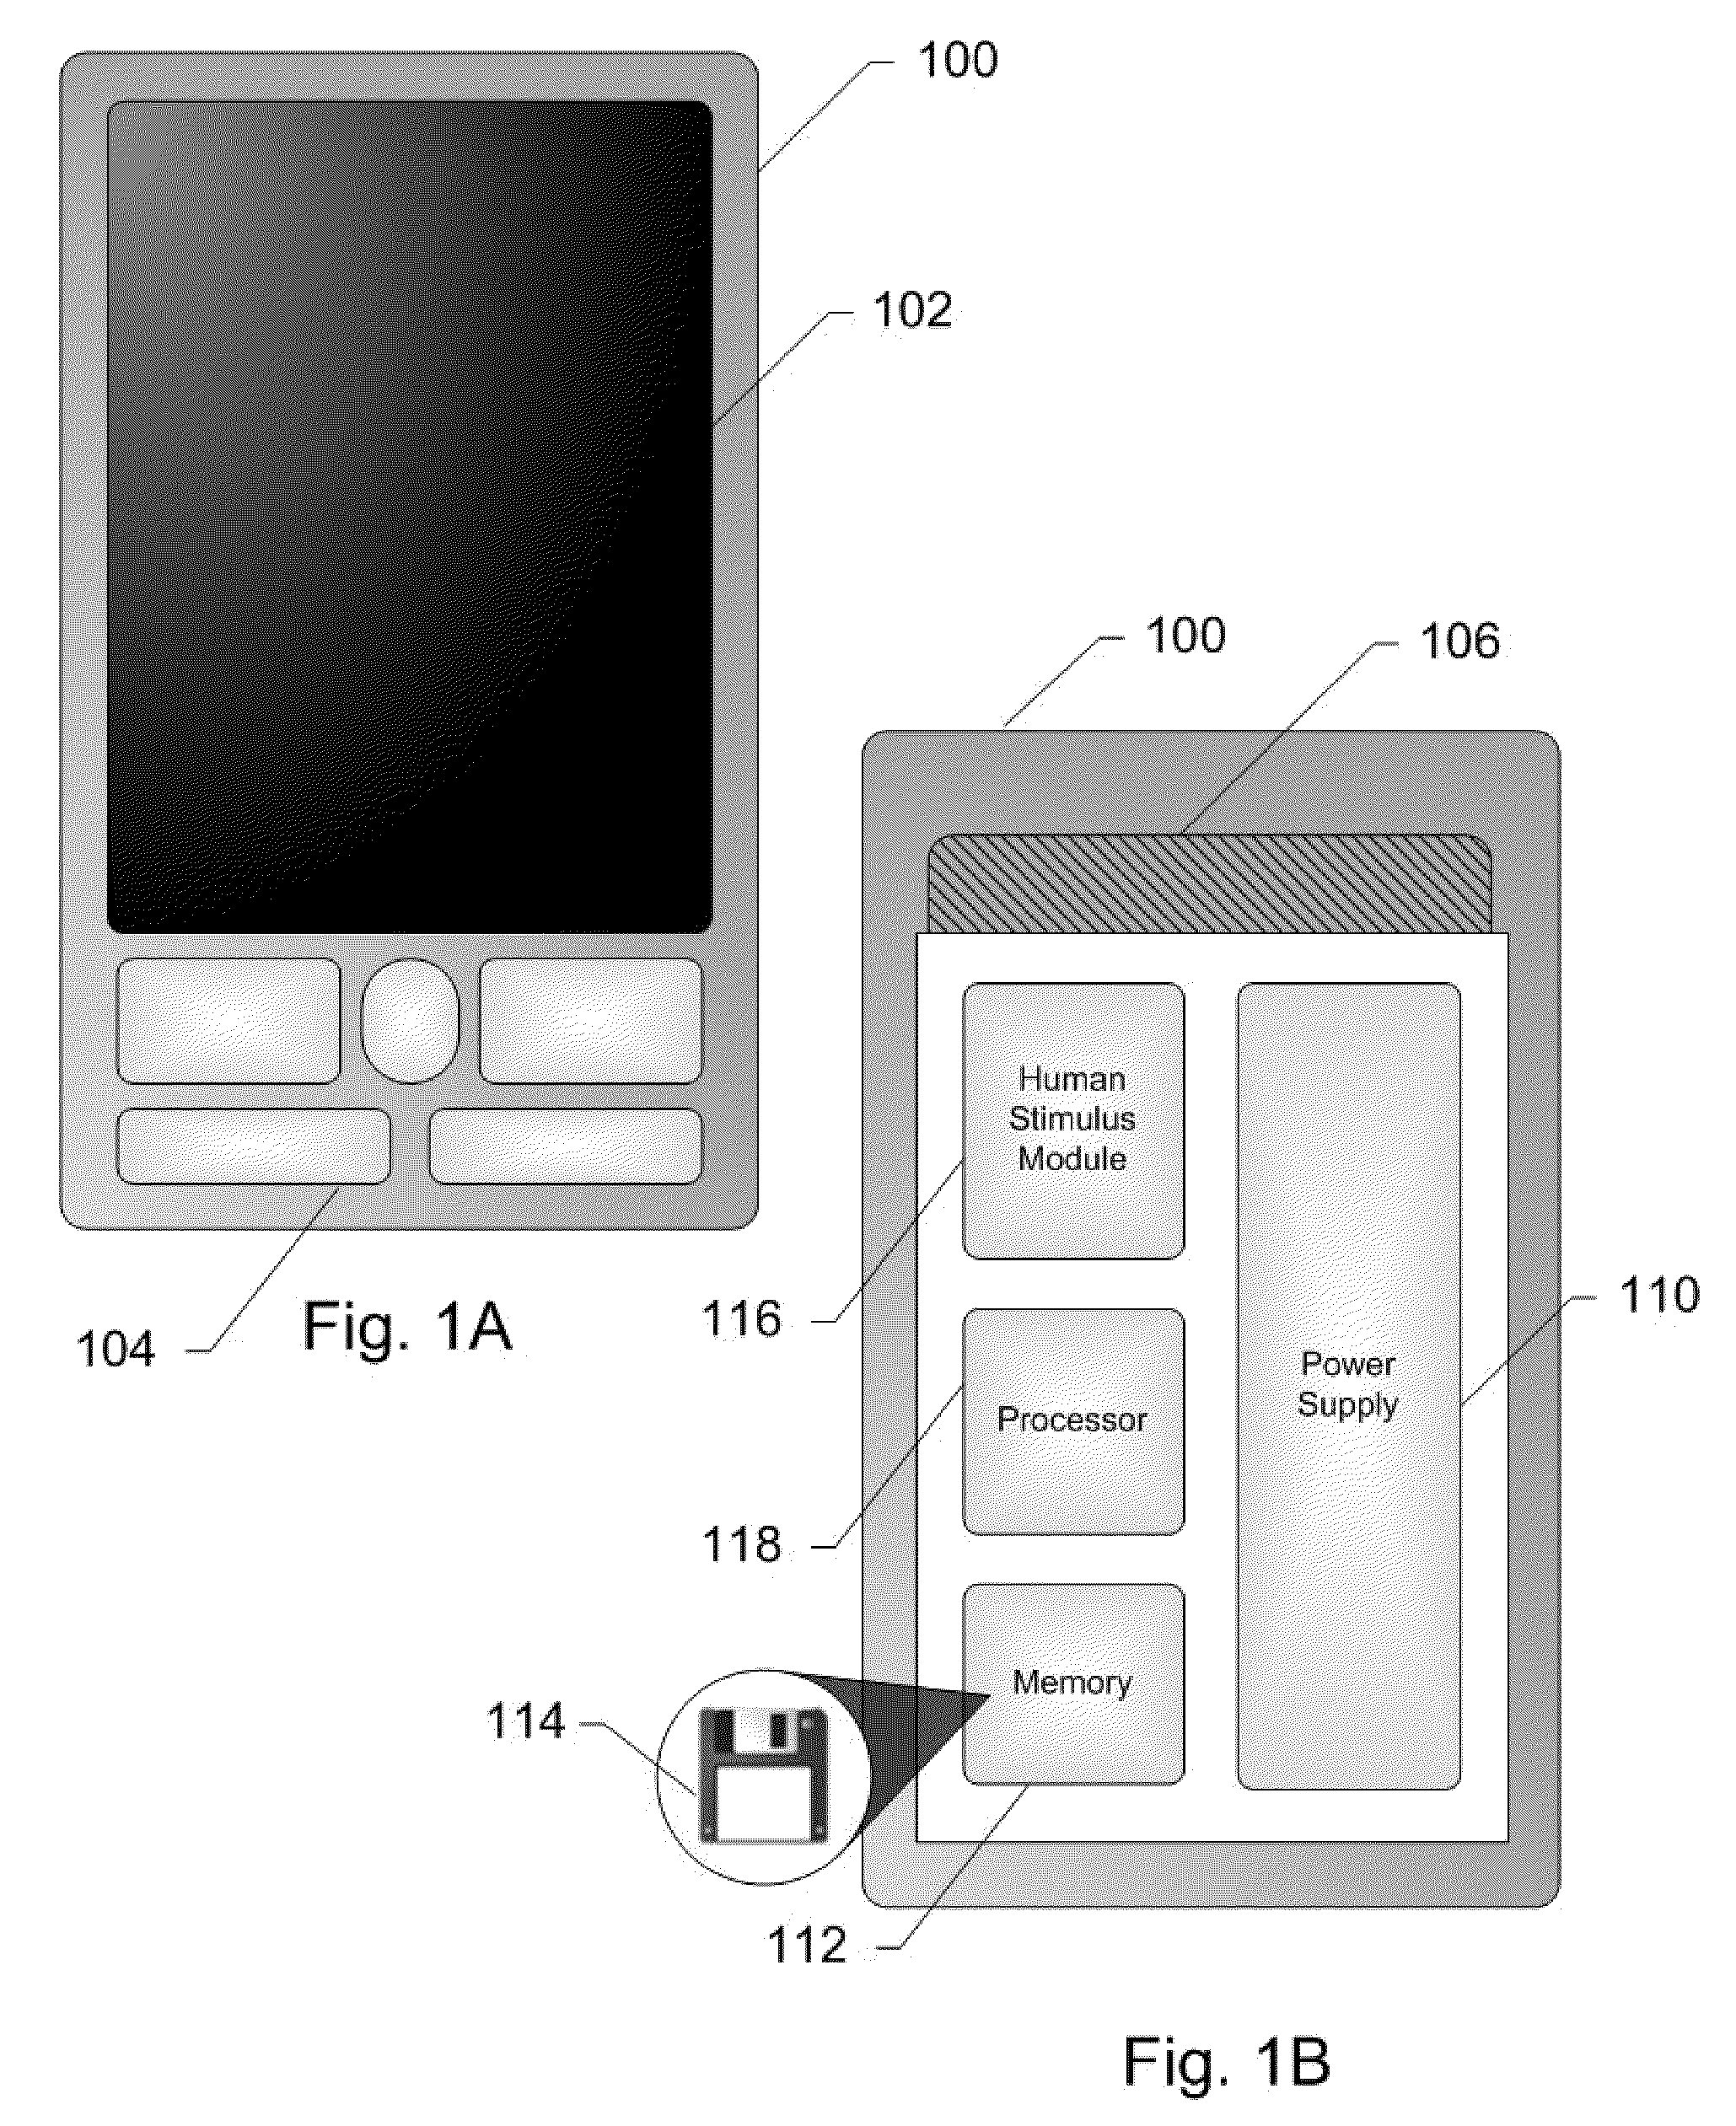 Human Stimulus Activation and Deactivation of a Screensaver